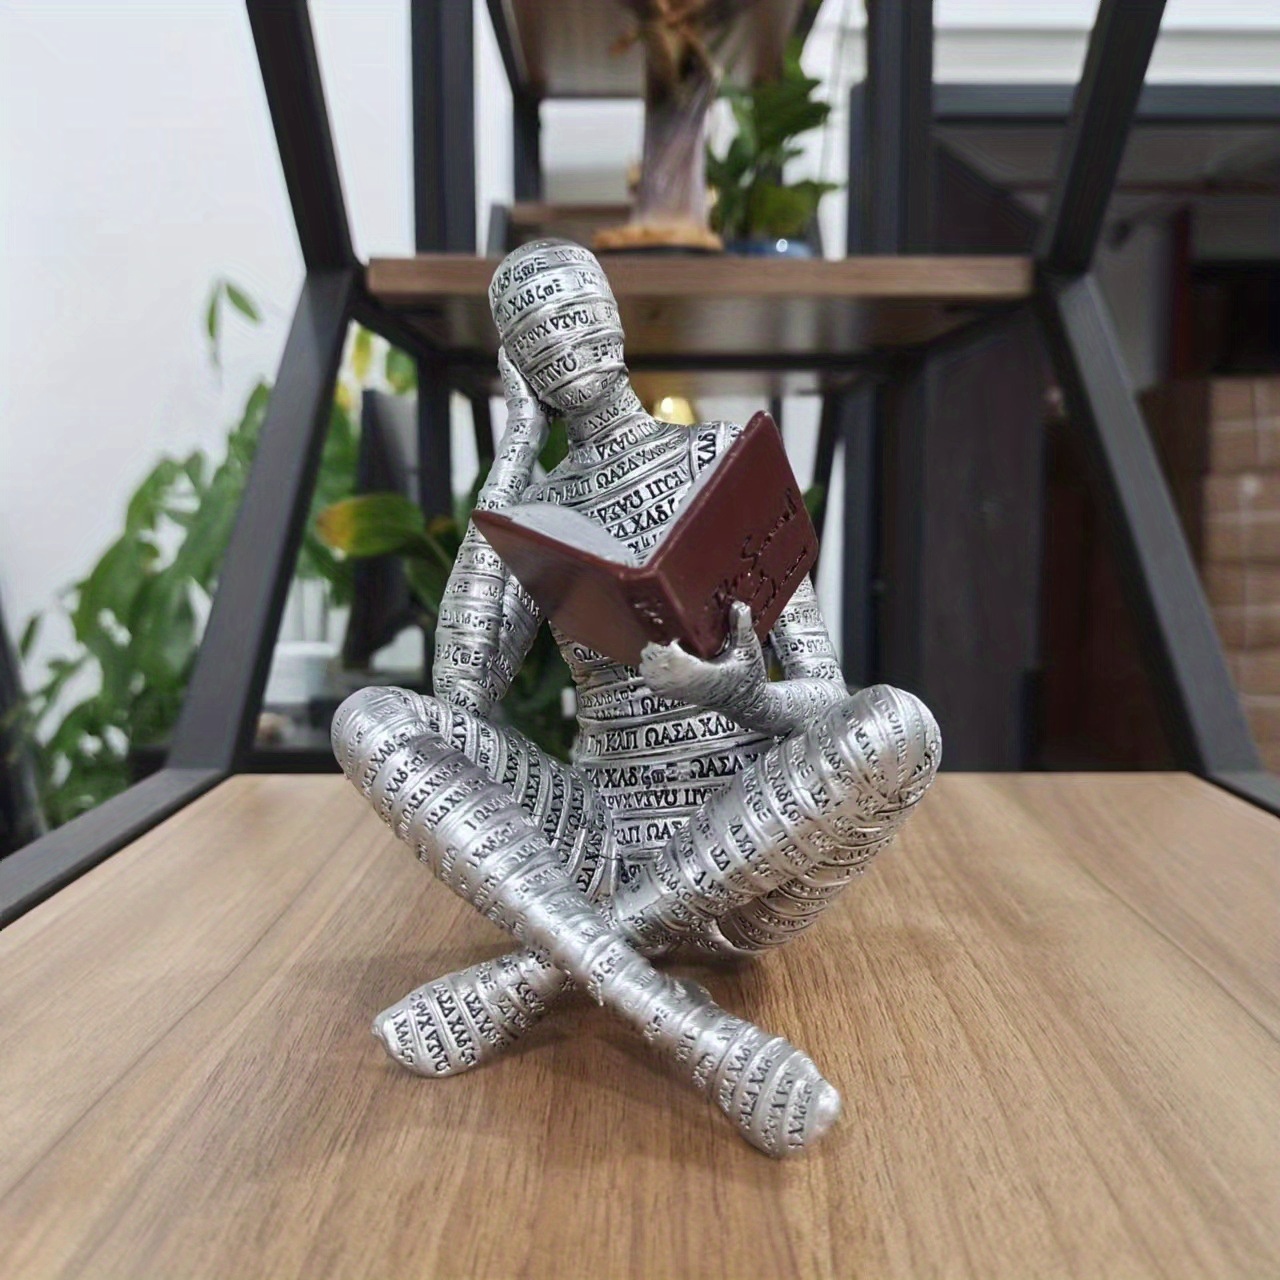 Silver Thinker Reading Statues for Home Decor, Pulp Women Figurine  Bookshelf Decor, Shelf Decorations for Living Room Office, Modern Abstract  Resin